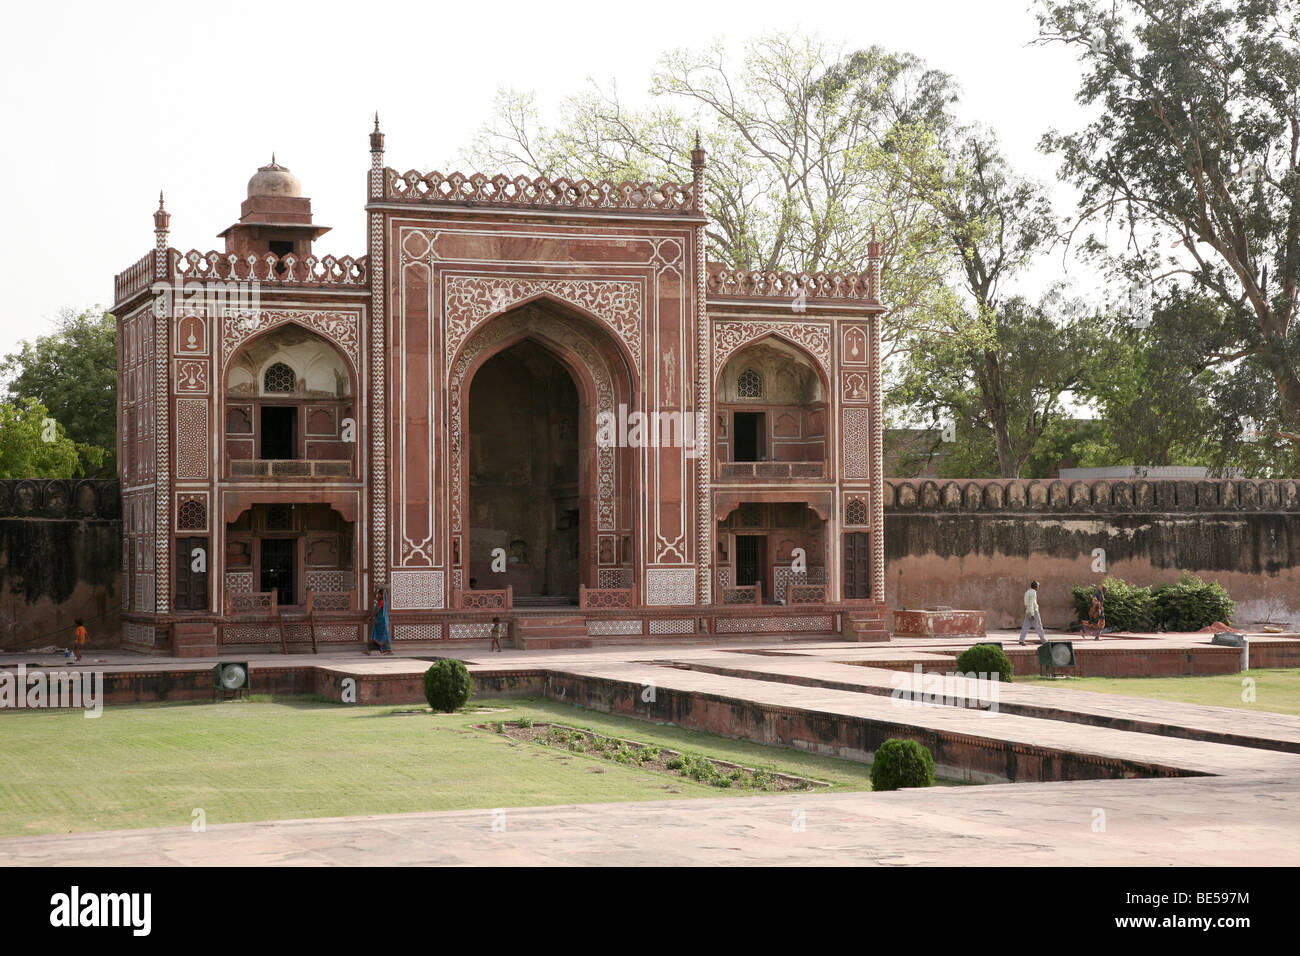 Gatehouse at the tomb of Itimad Ud Daulah, or 'Baby Taj' in Agra, India. Stock Photo